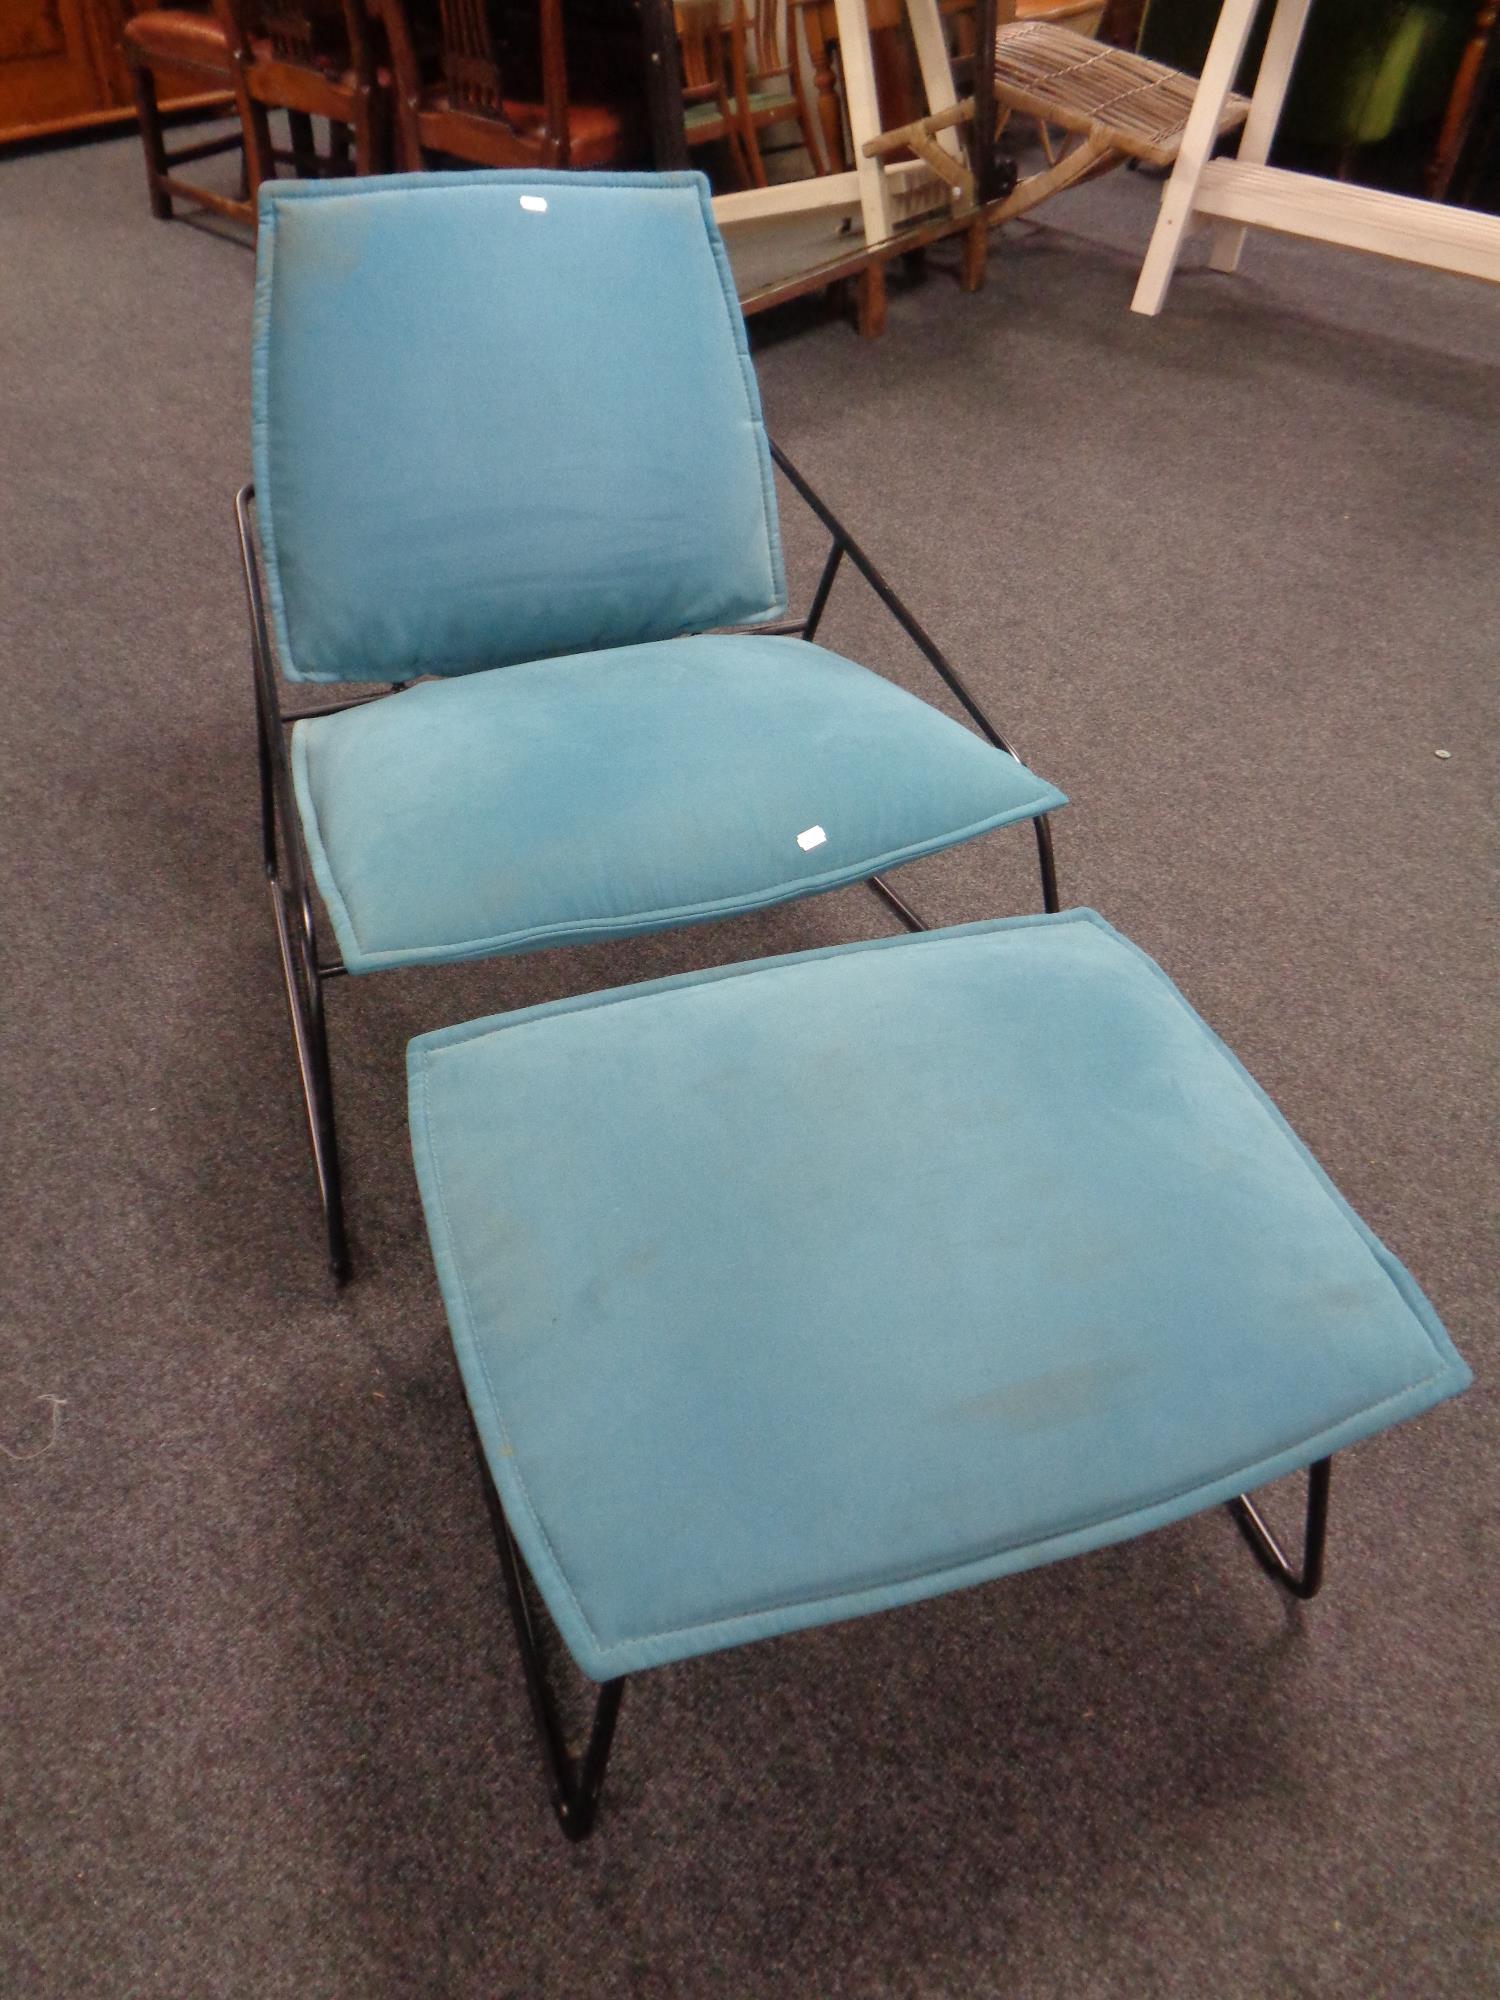 A Ikea tubular metal framed lounge chair with matching footstool upholstered in a turquoise fabric